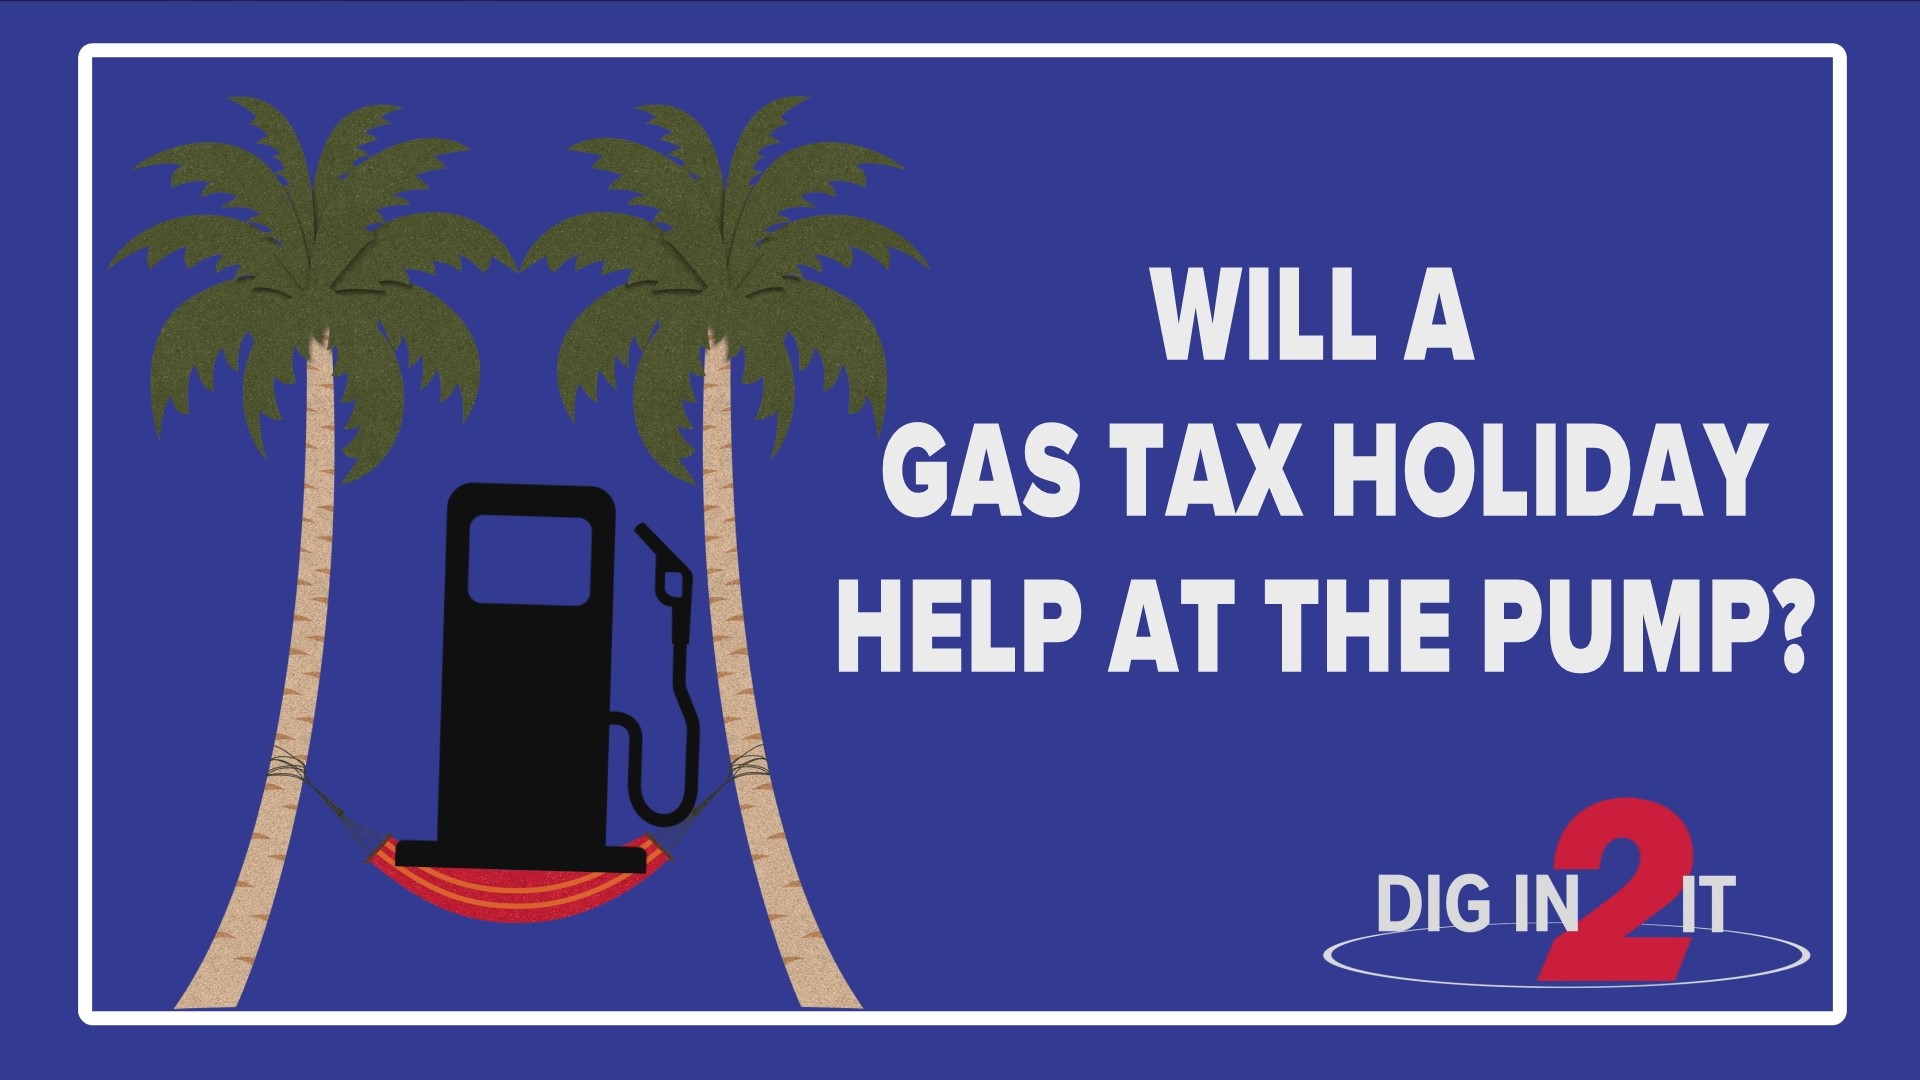 Lawmakers and economists worry about the impacts of a gas tax holiday in the short and near term.